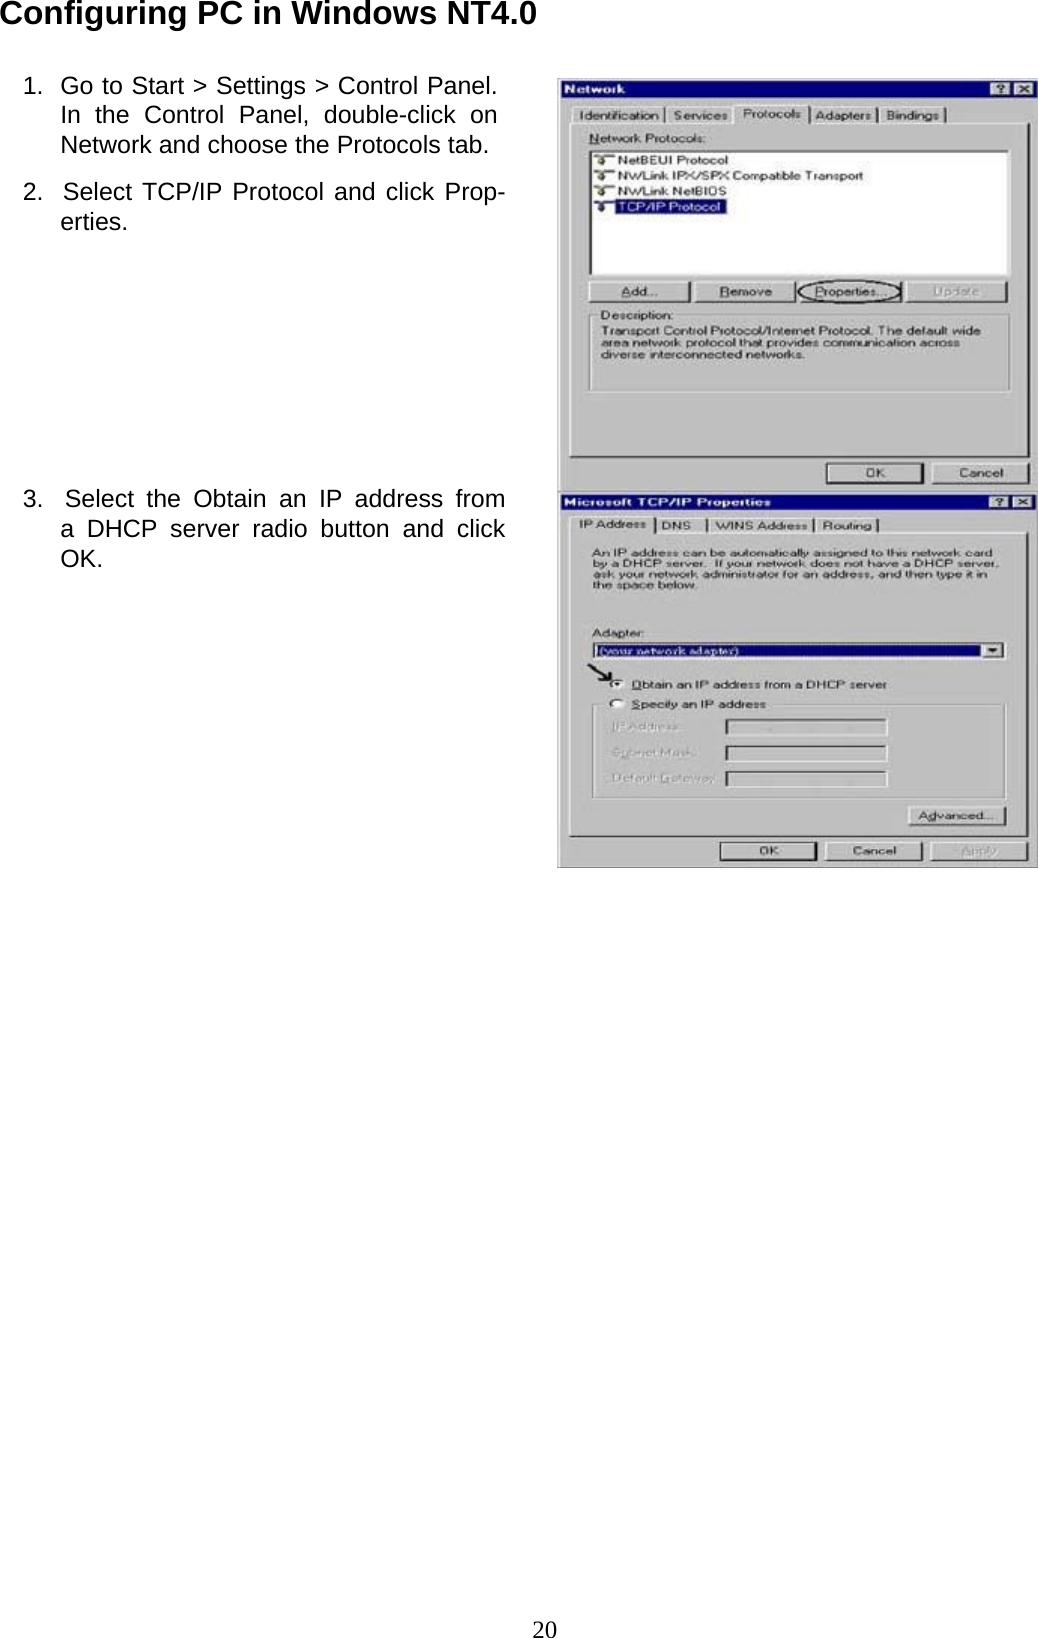 20 Configuring PC in Windows NT4.0   1.  Go to Start &gt; Settings &gt; Control Panel. In  the  Control  Panel,  double-click  on Network and choose the Protocols tab.  2.  Select TCP/IP Protocol and click Prop- erties.             3.  Select the Obtain an IP address from a DHCP server radio button and click OK. 